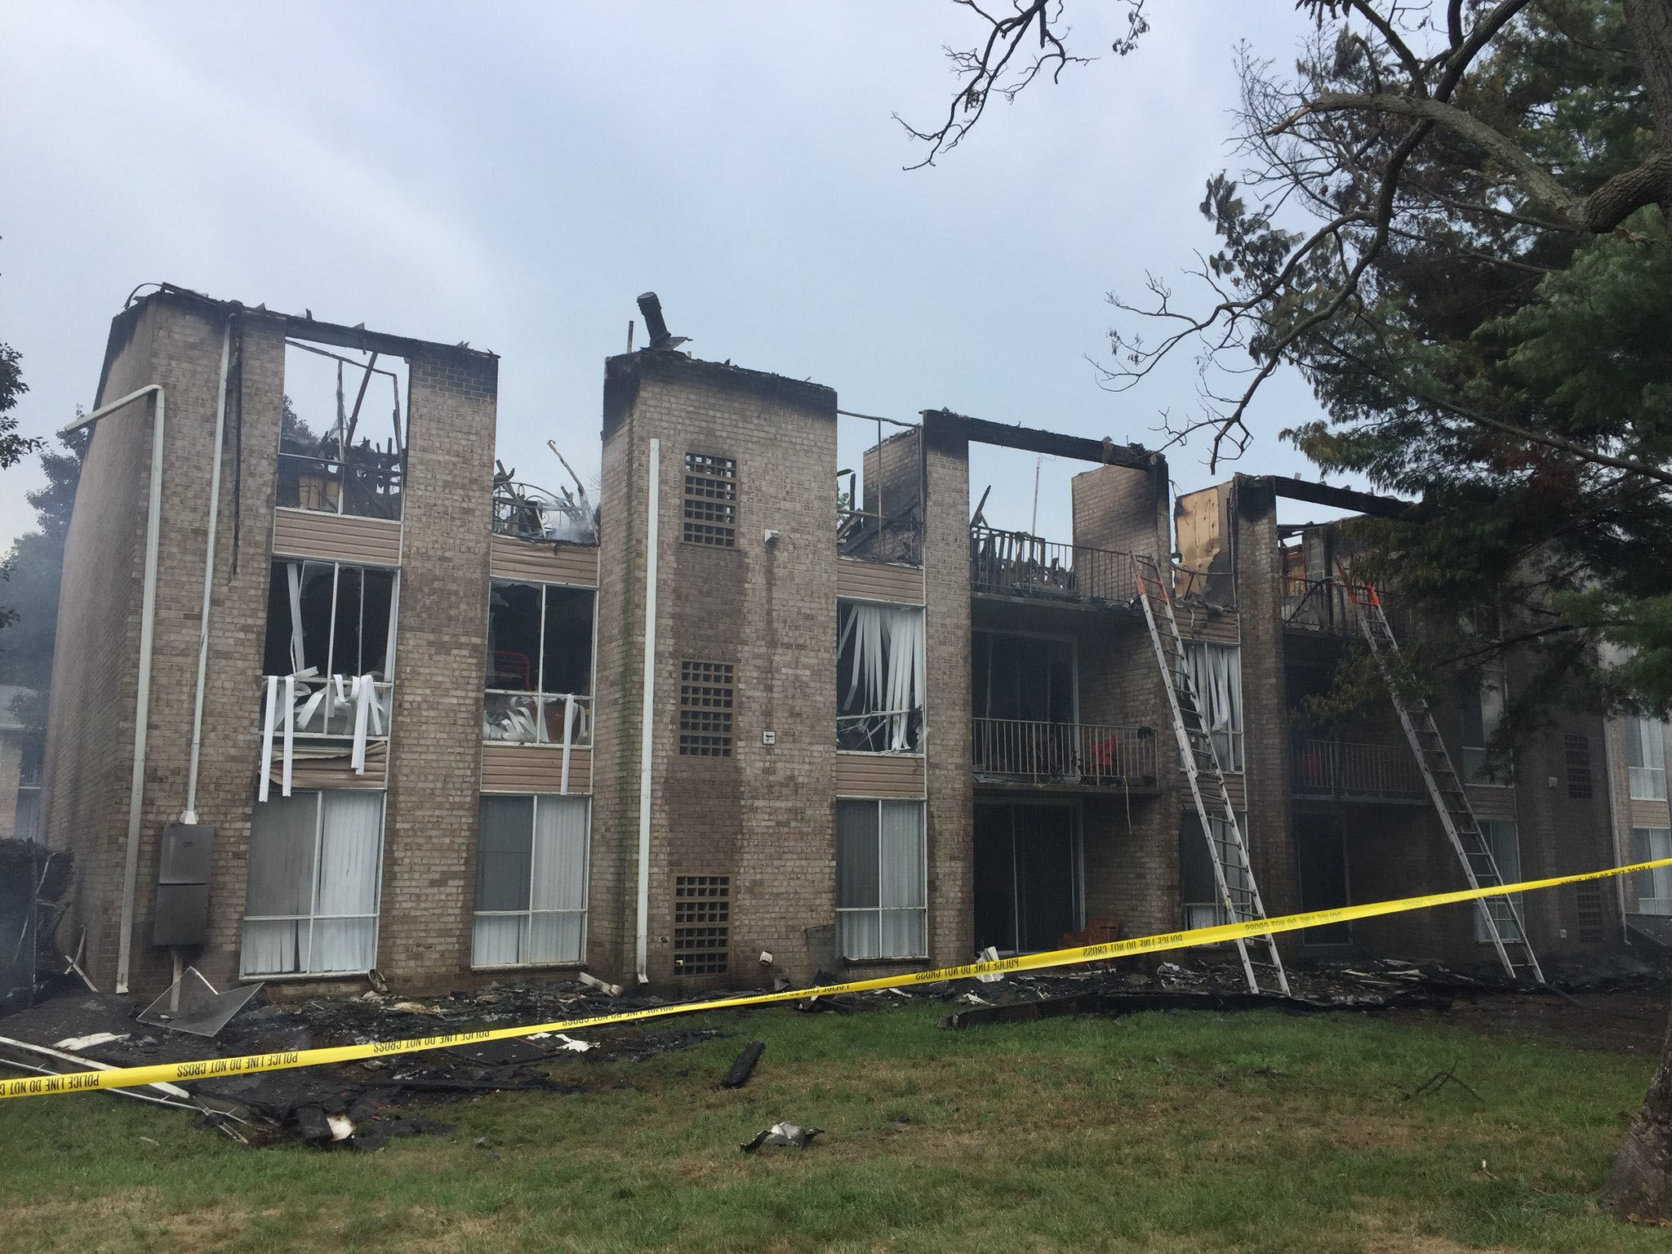 The fire gutted 11 apartments in the Franklin Park complex in Greenbelt. Nine adults and five children were displaced. (WTOP/Kristi King)